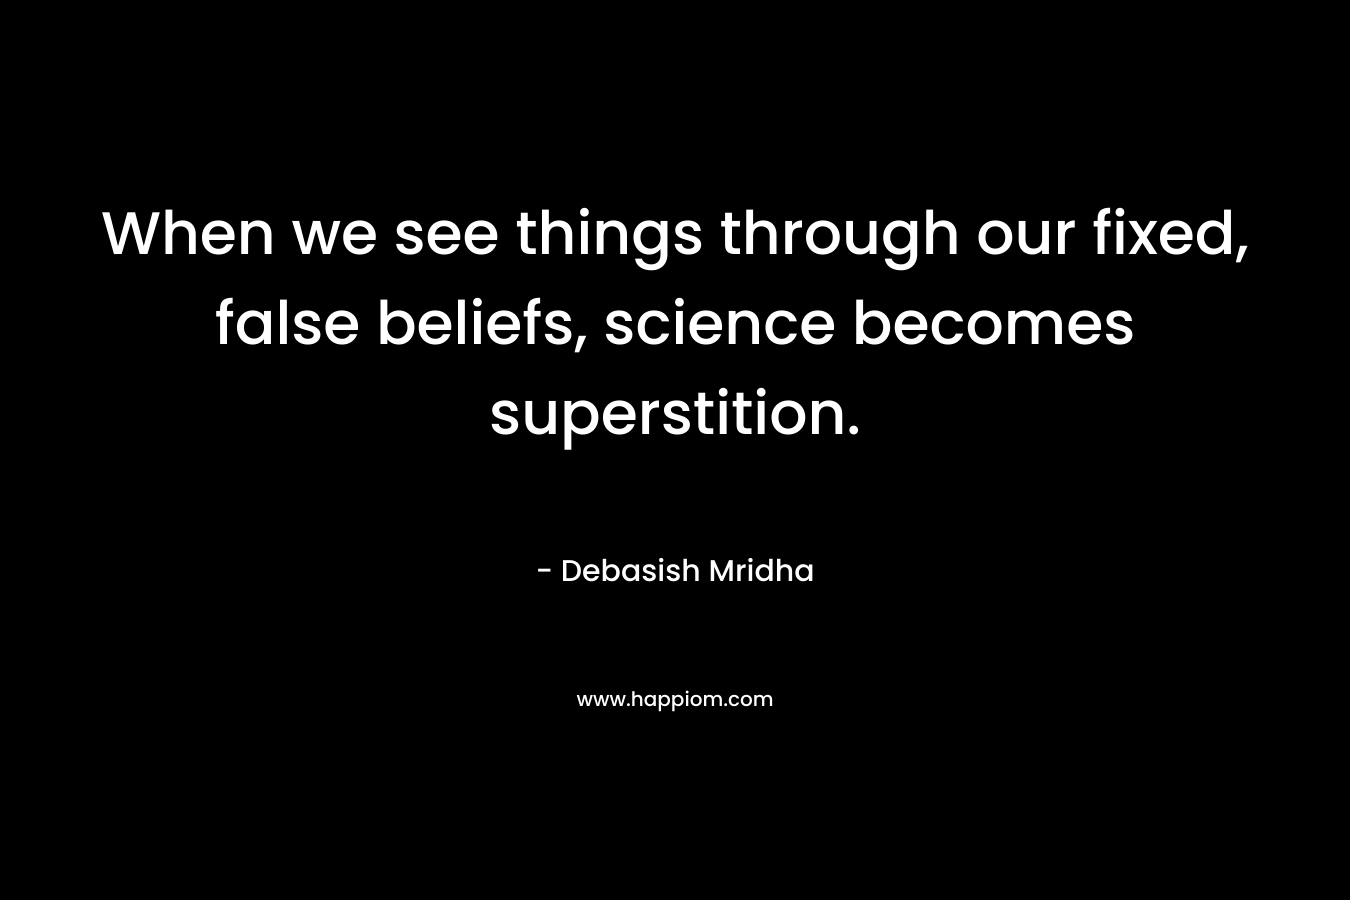 When we see things through our fixed, false beliefs, science becomes superstition.